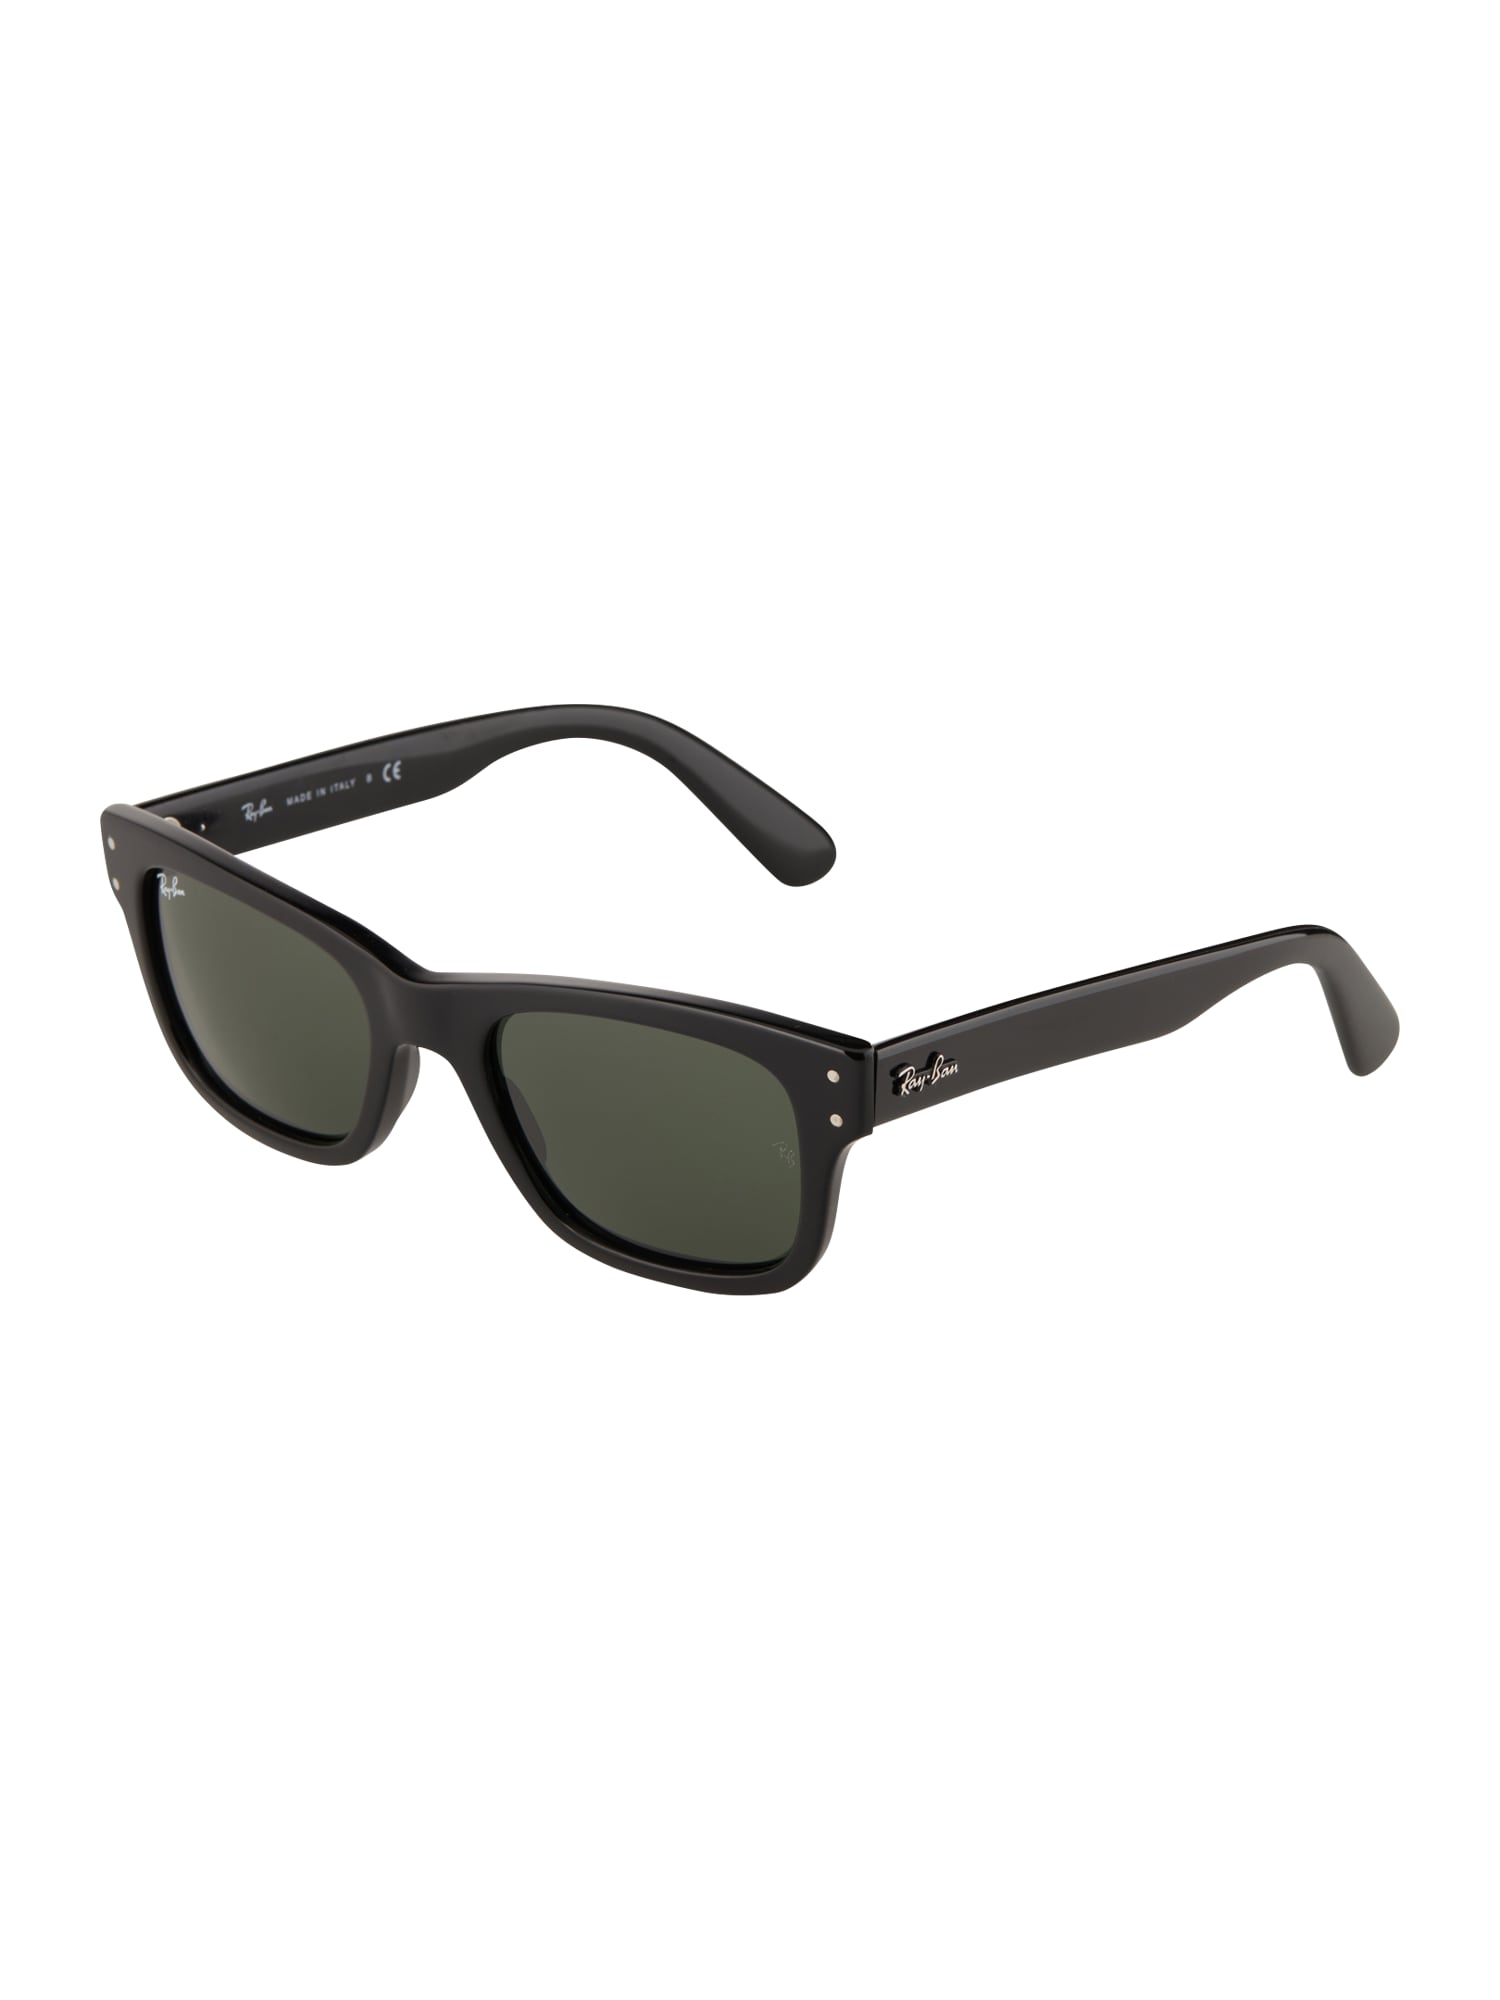 Ray-Ban Saulesbrilles '0RB2283' melns / sudrabs